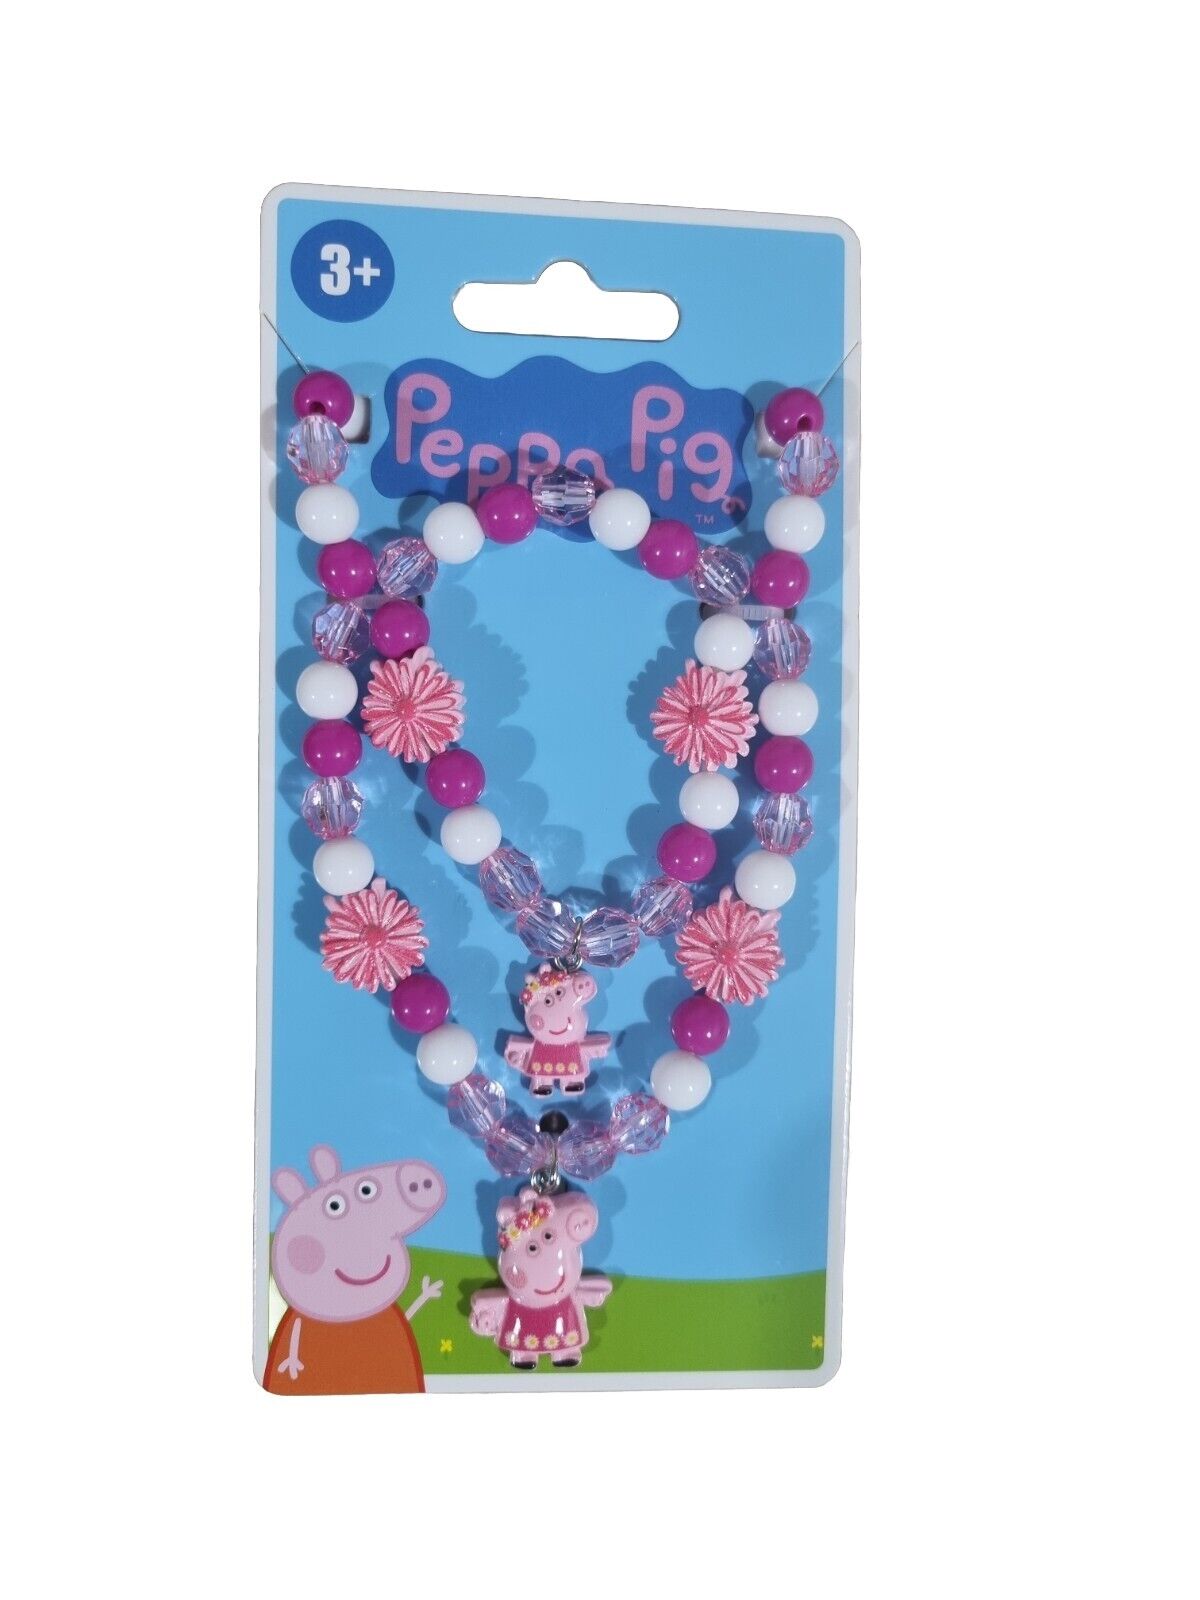 Peppa Pig Necklace And Bracelet Christmas Stockings Filling 